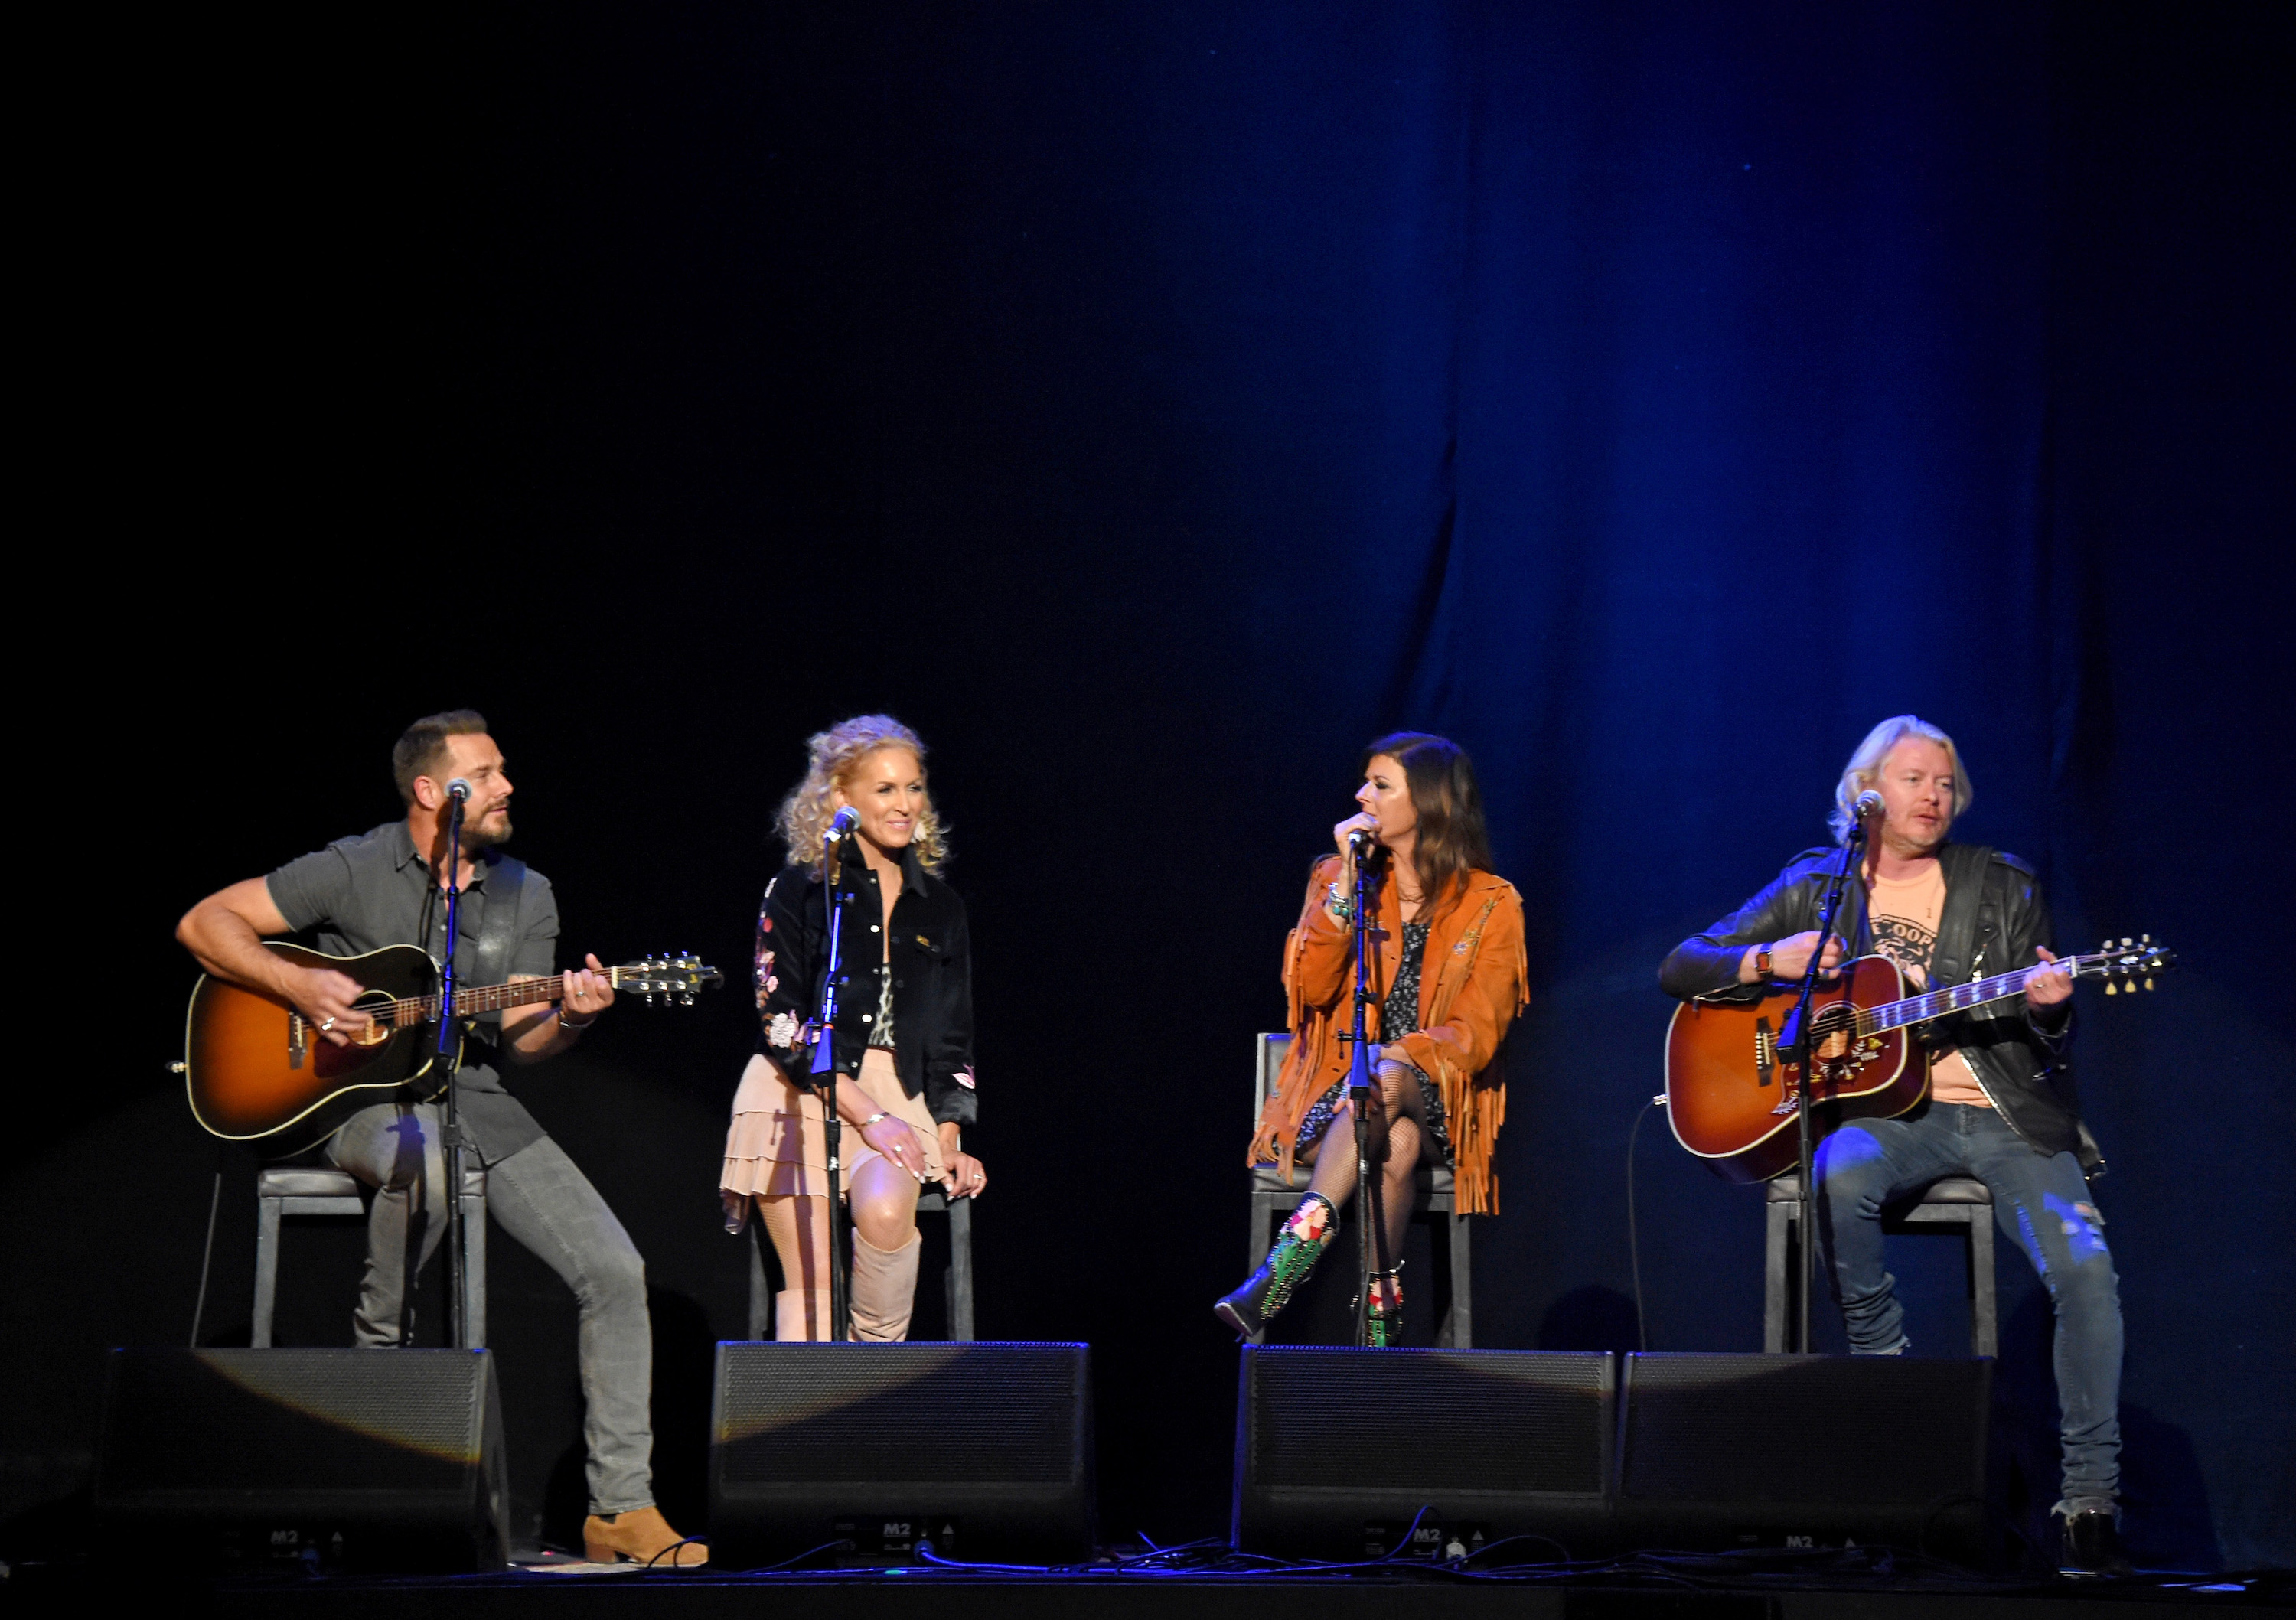 Little Big Town, Midland, Thomas Rhett, and Cam Come Together for ACM Stories, Songs & Stars